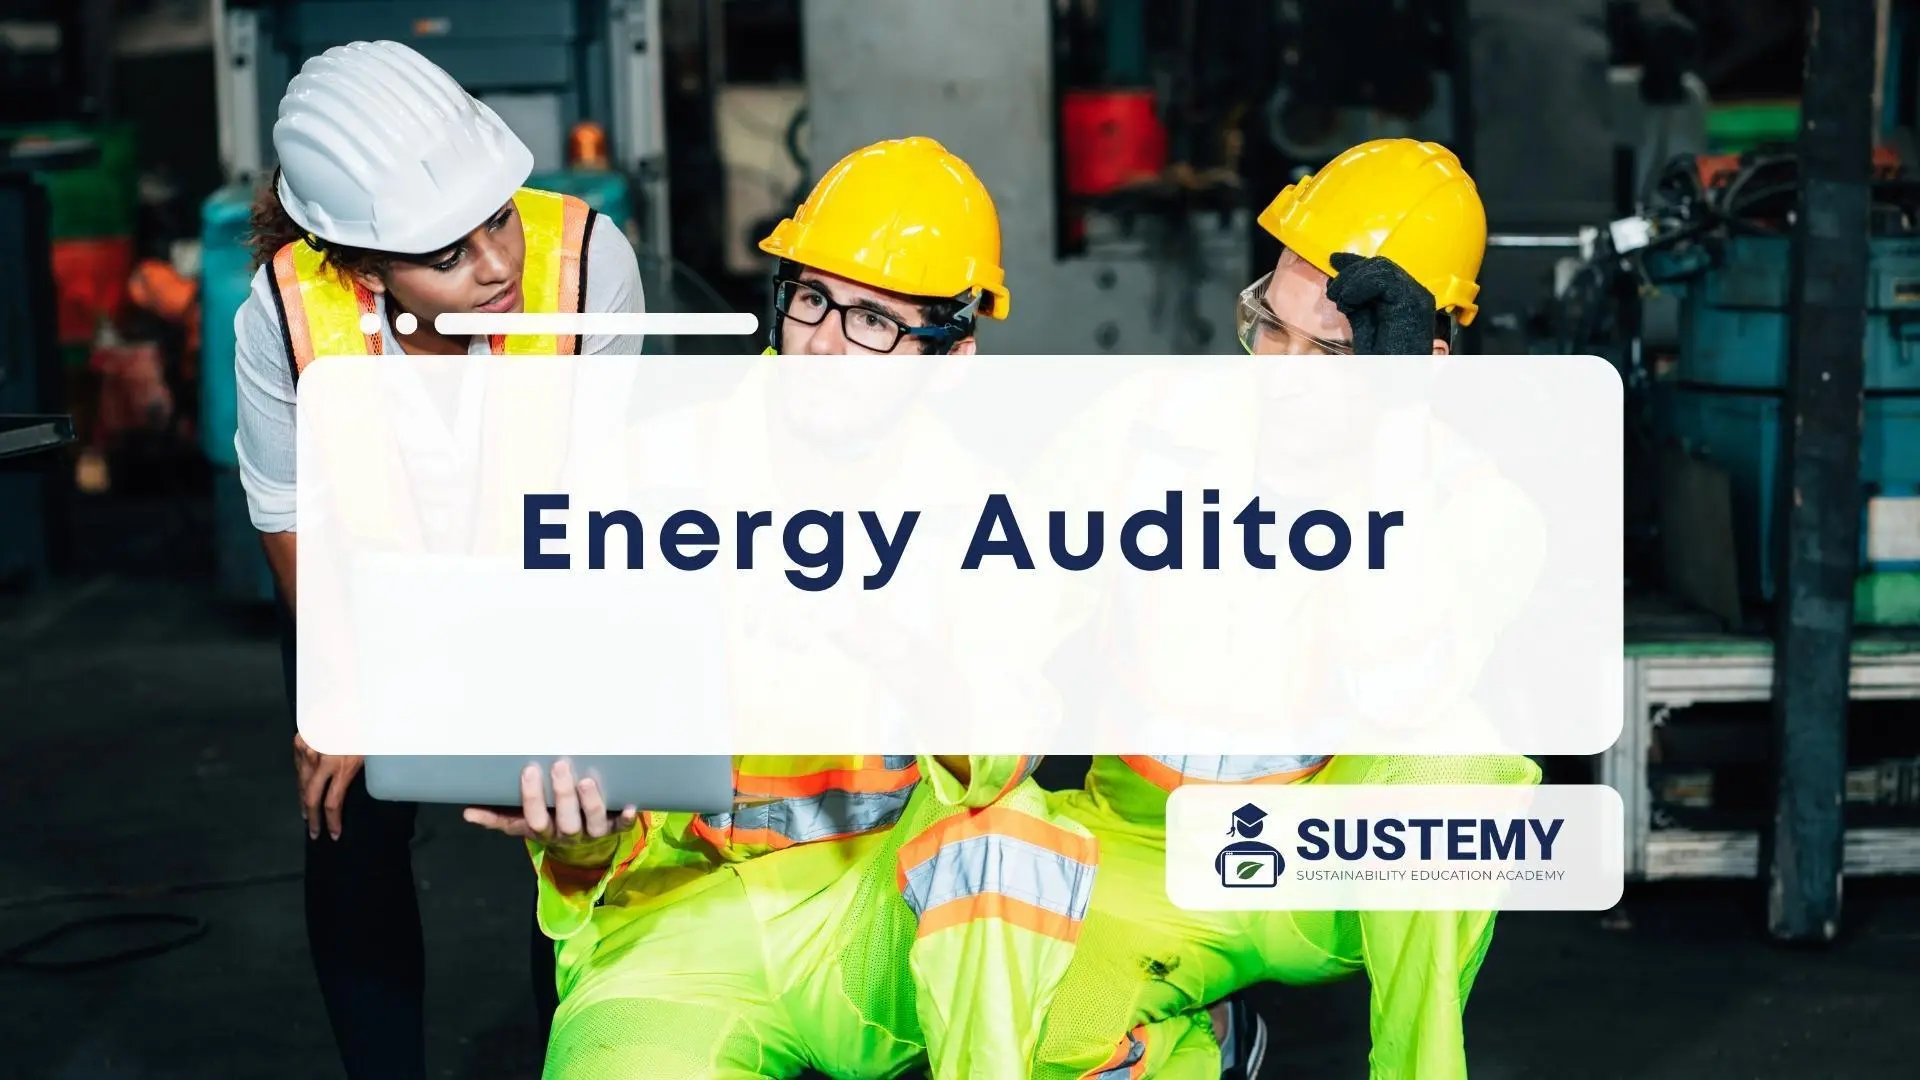 energy auditor jobs - What does an energy auditor do